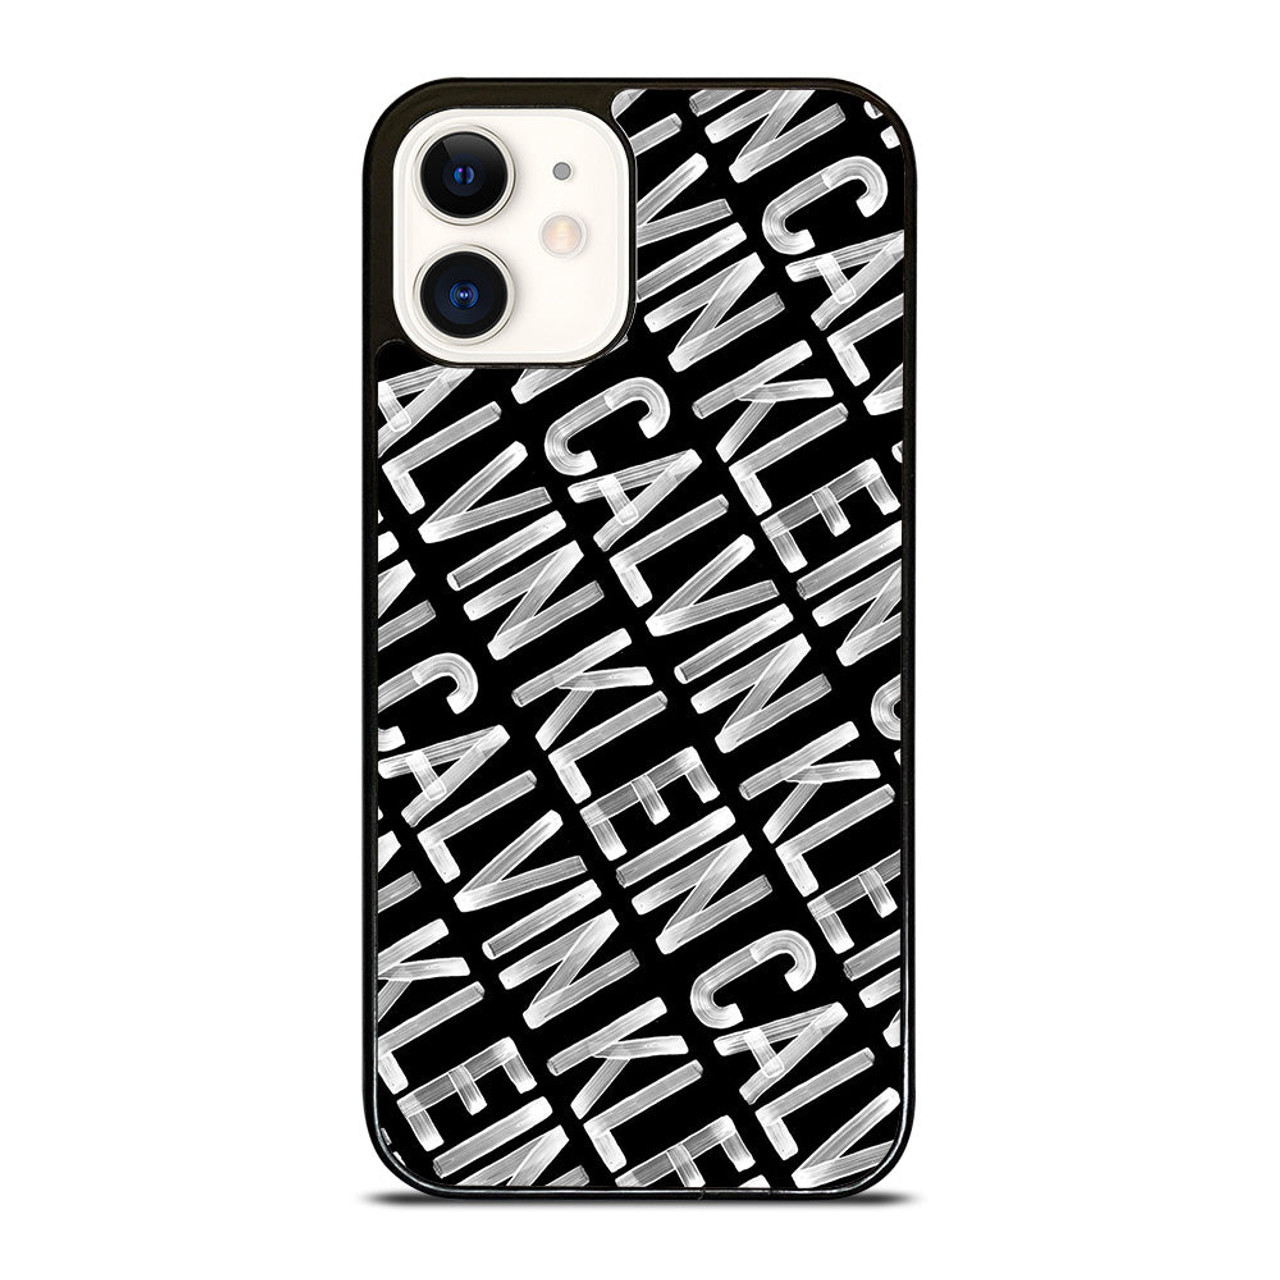 KLEIN LOGO PATTERN iPhone 12 Cover